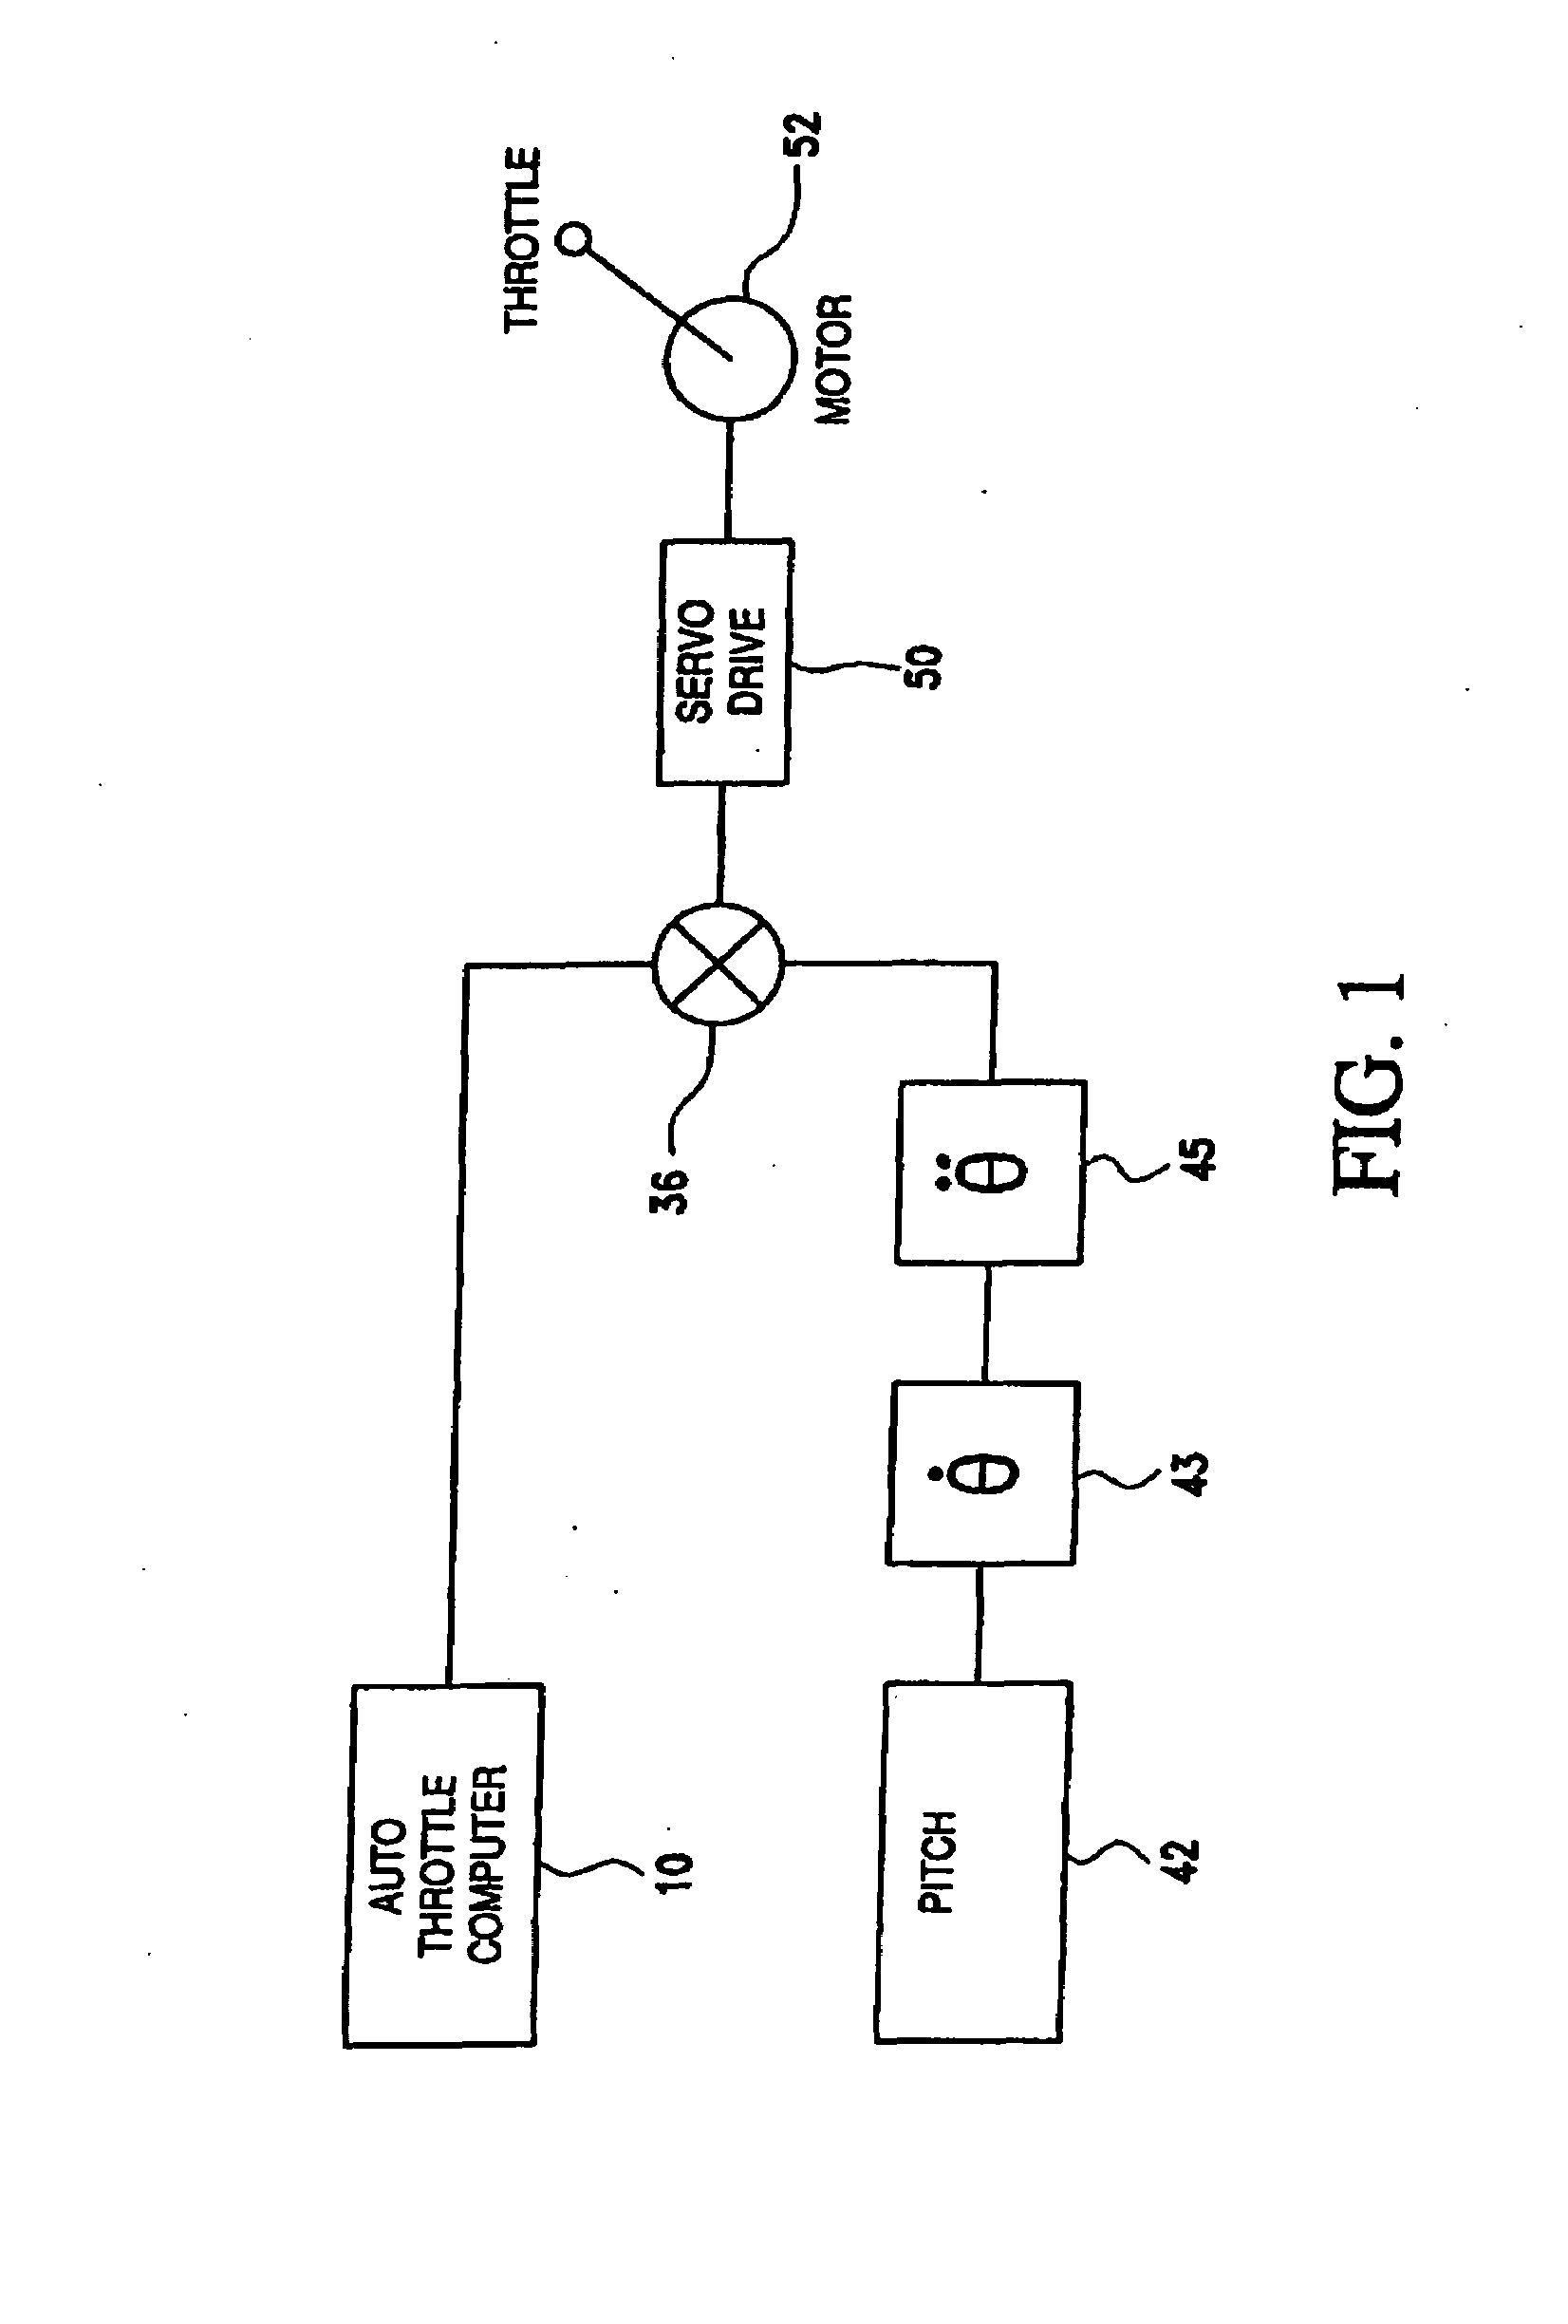 Automated throttle control system